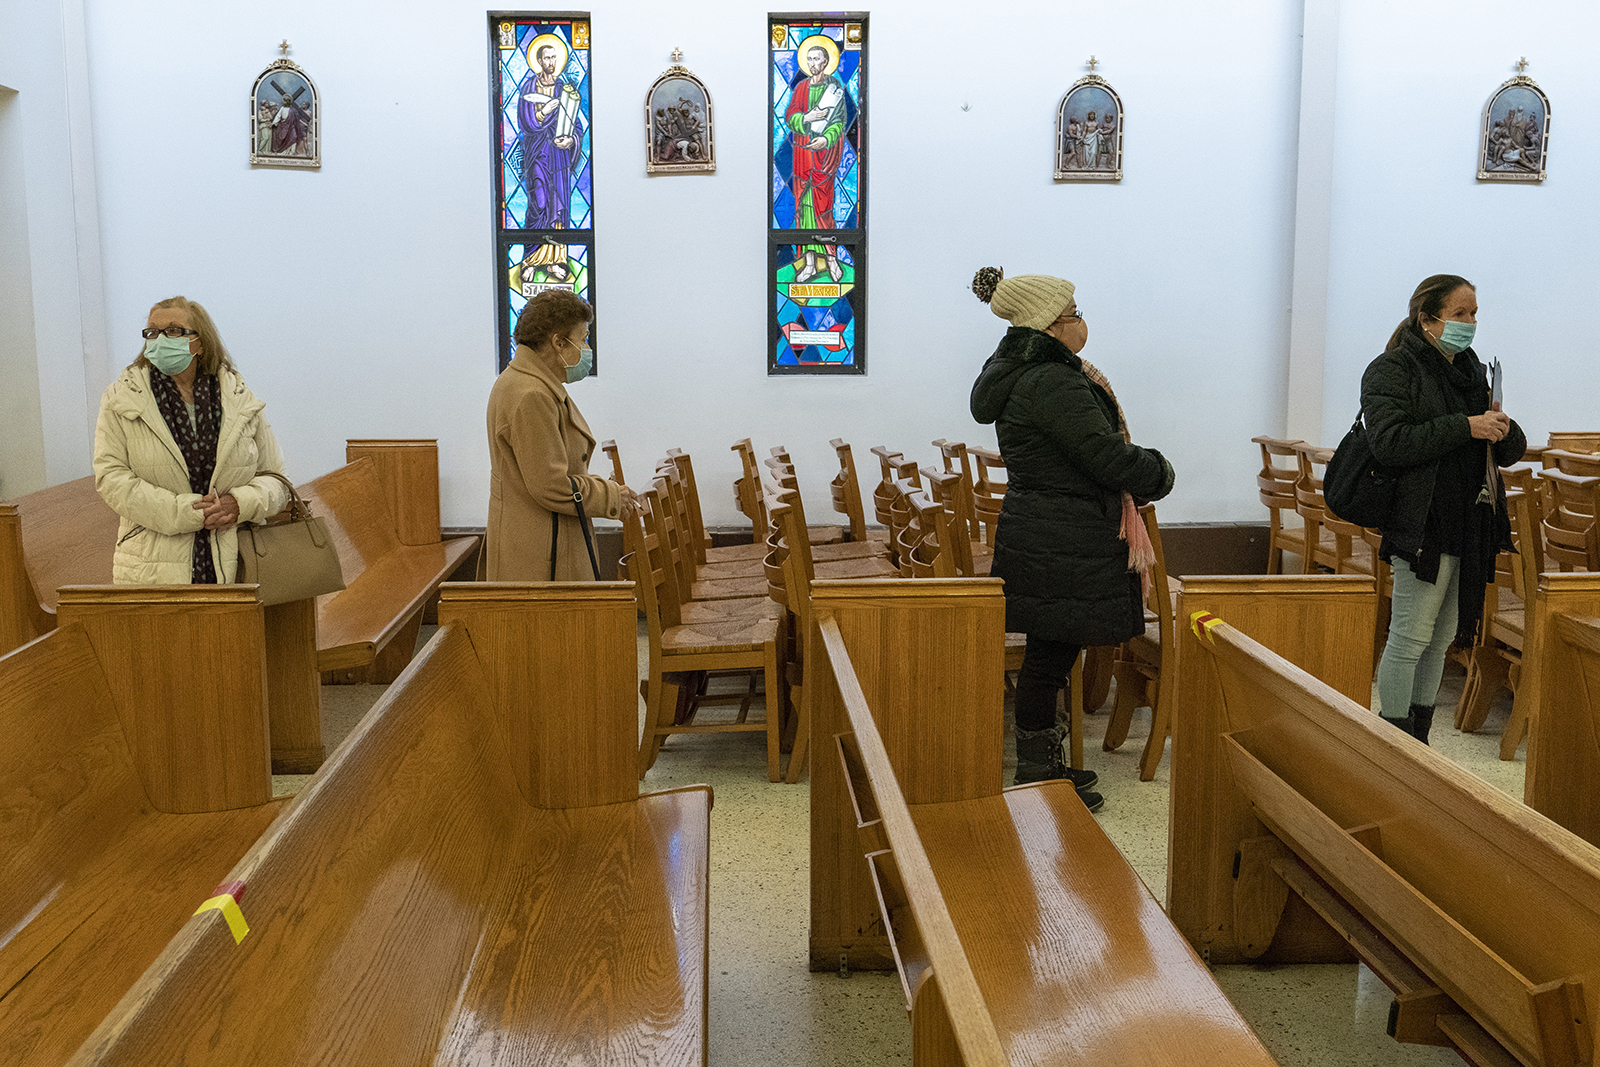 People line up next to the pews at a pop-up COVID-19 vaccination site at St. Luke's Episcopal Church, Jan. 26, 2021, in the Bronx borough of New York. (AP Photo/Mary Altaffer)